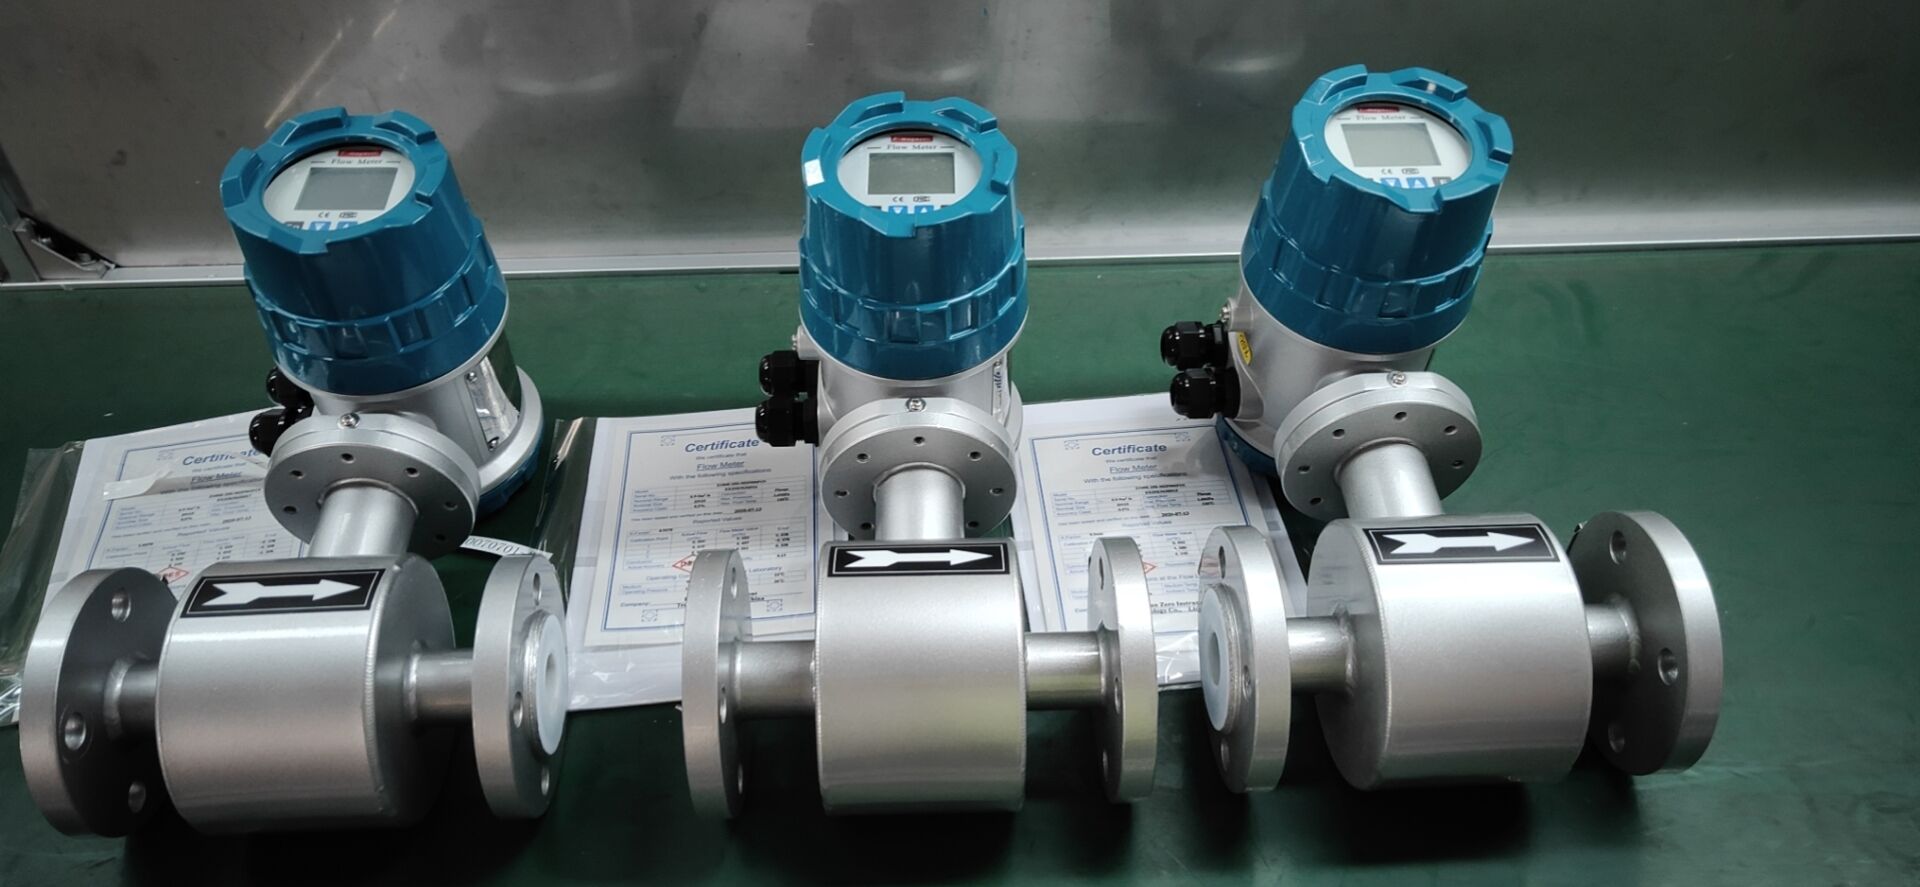 Newly design magnetic flow meters